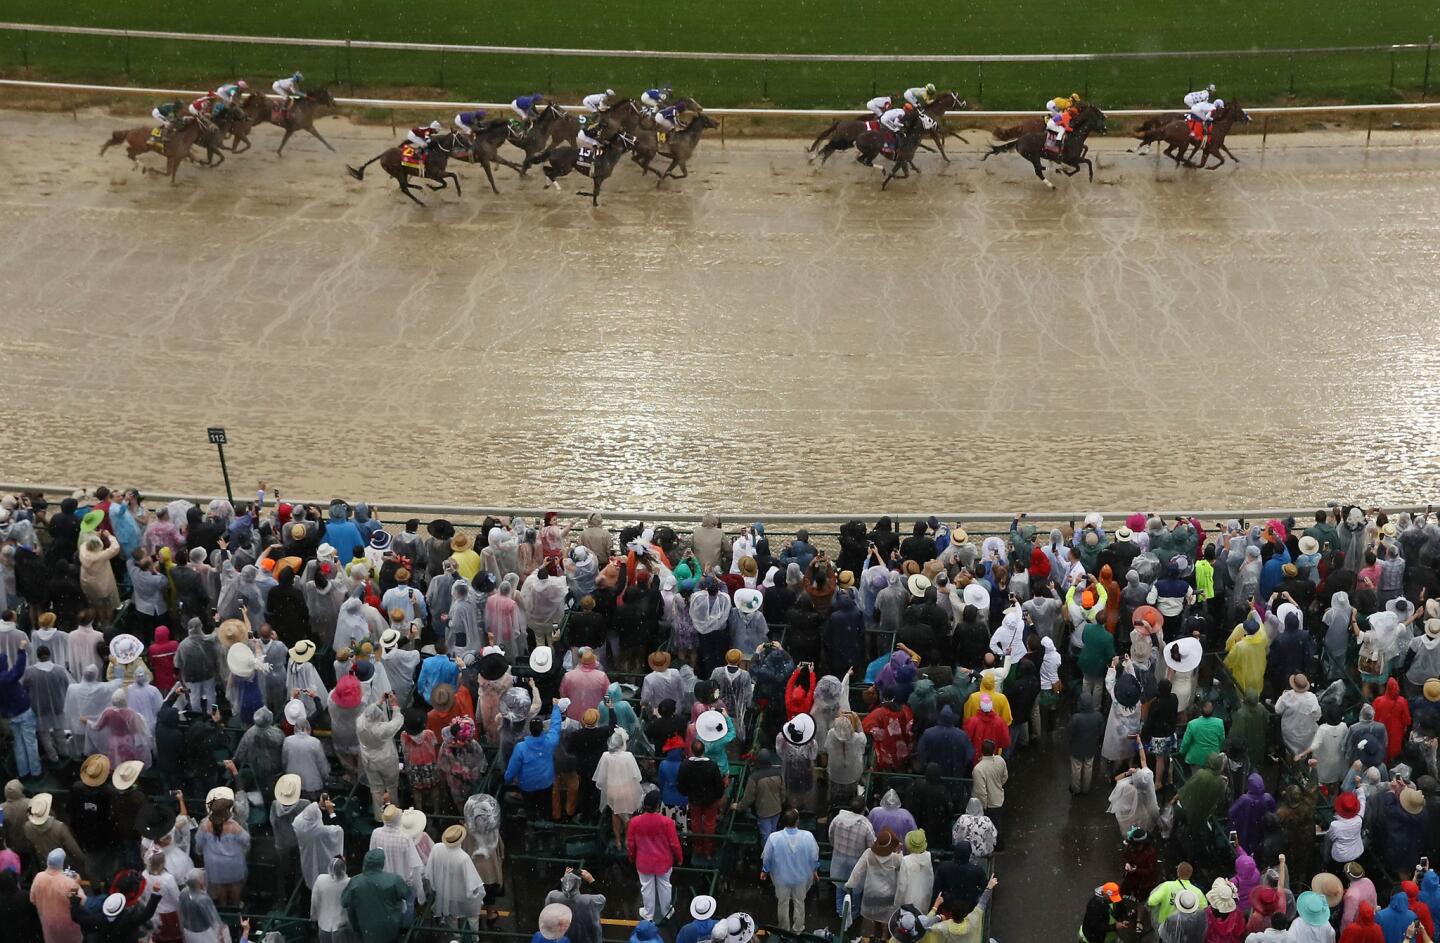 Spectators watch Promises Fulfilled, ridden by jockey Corey Lanerie, and Justify, with Mike Smith aboard, lead the field into the first turn during the 144th running of the Kentucky Derby.